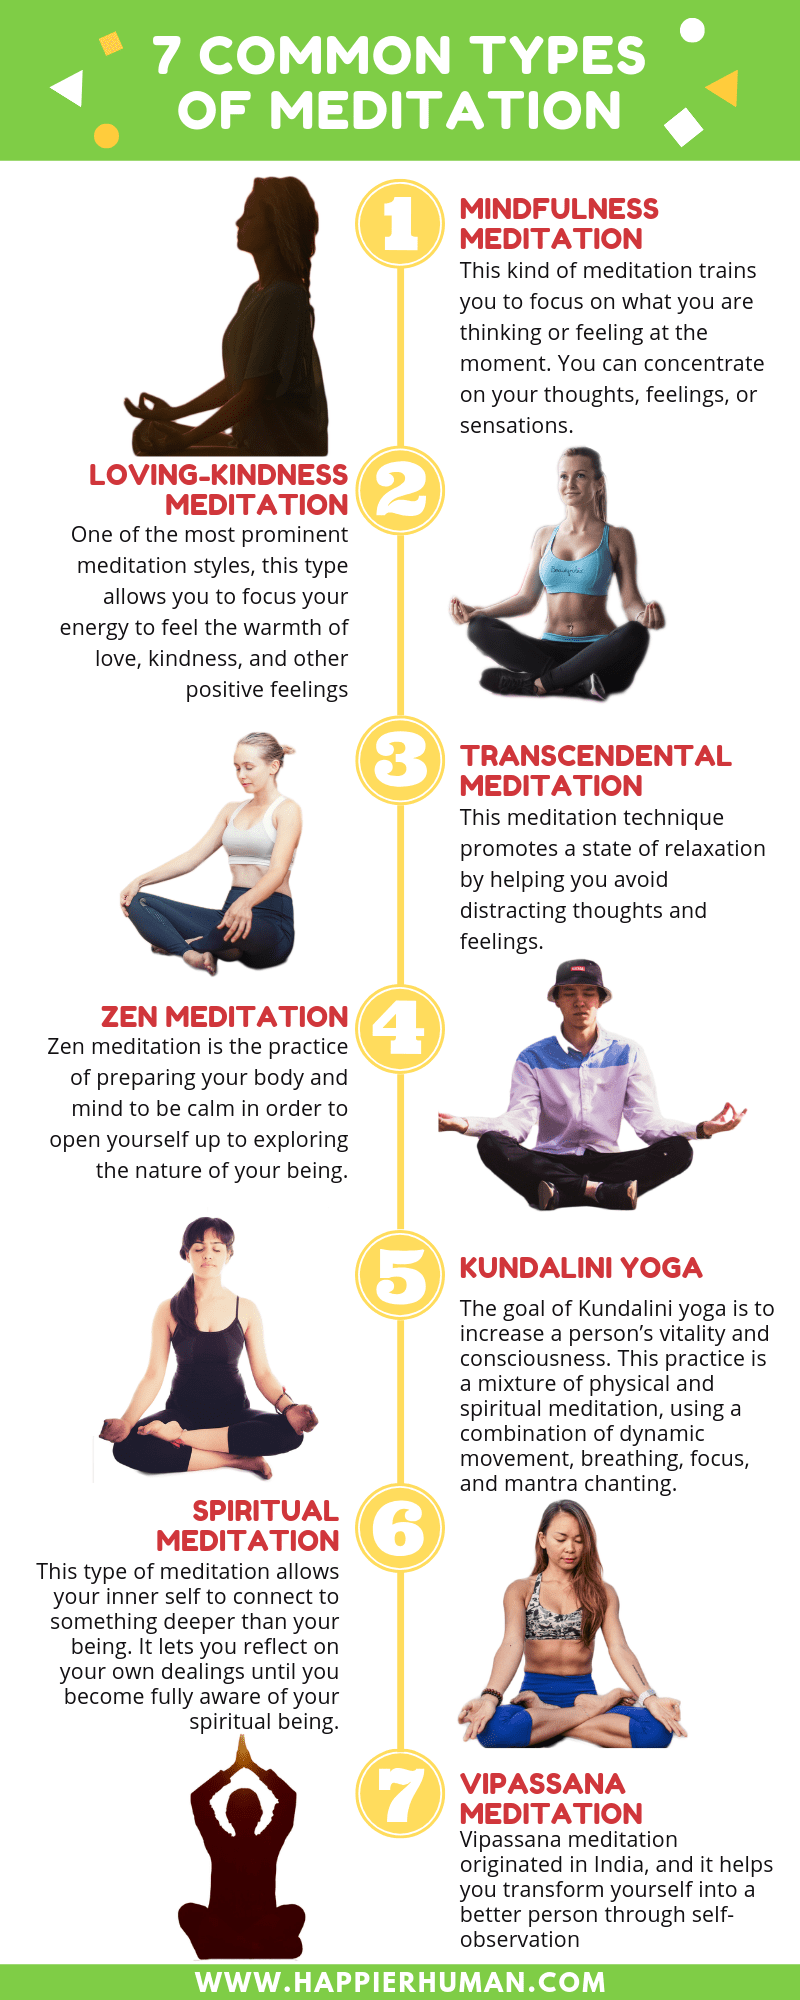 How to Properly Meditate: A Complete Guide for Beginners - Happier Human